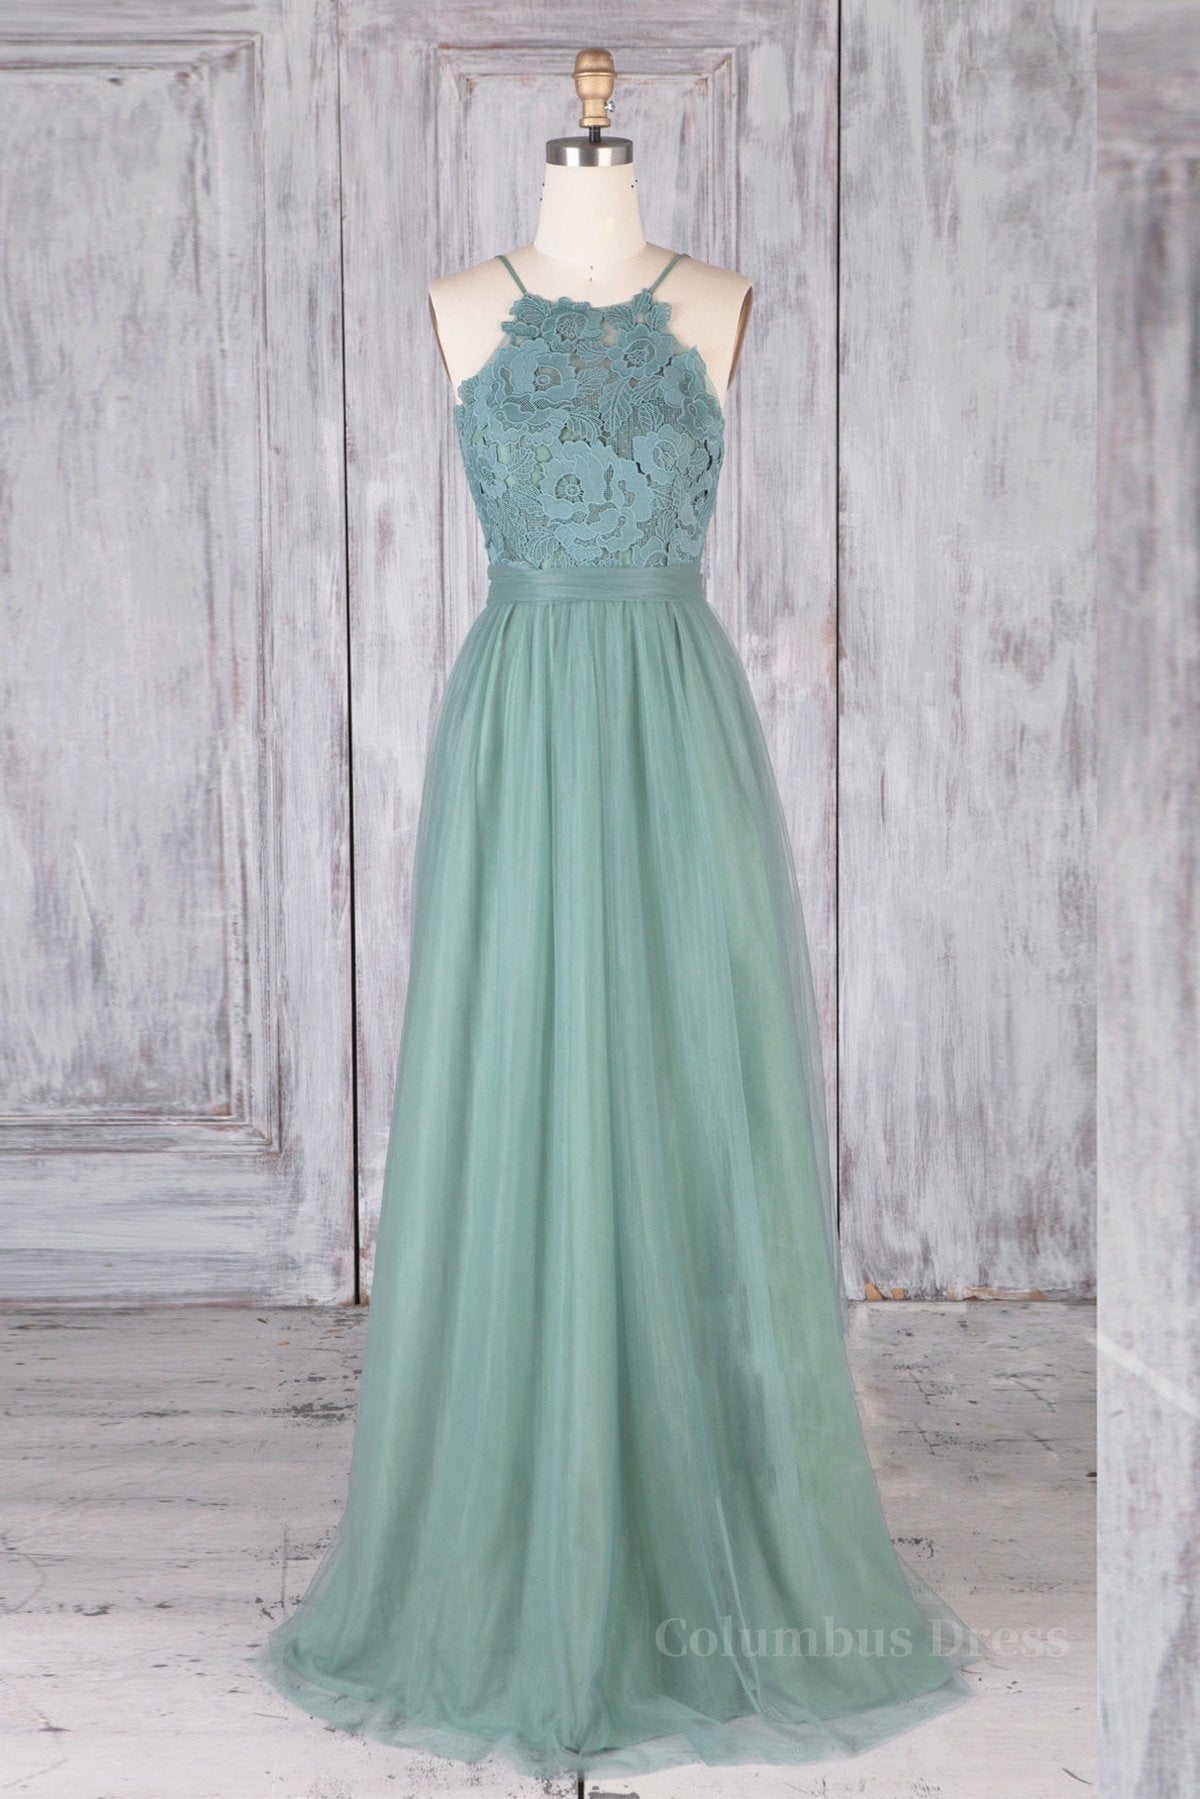 Evening Dresses Gold, A Line Backless Lace Green Long Prom Dresses, Backless Green Lace Formal Graduation Evening Dresses